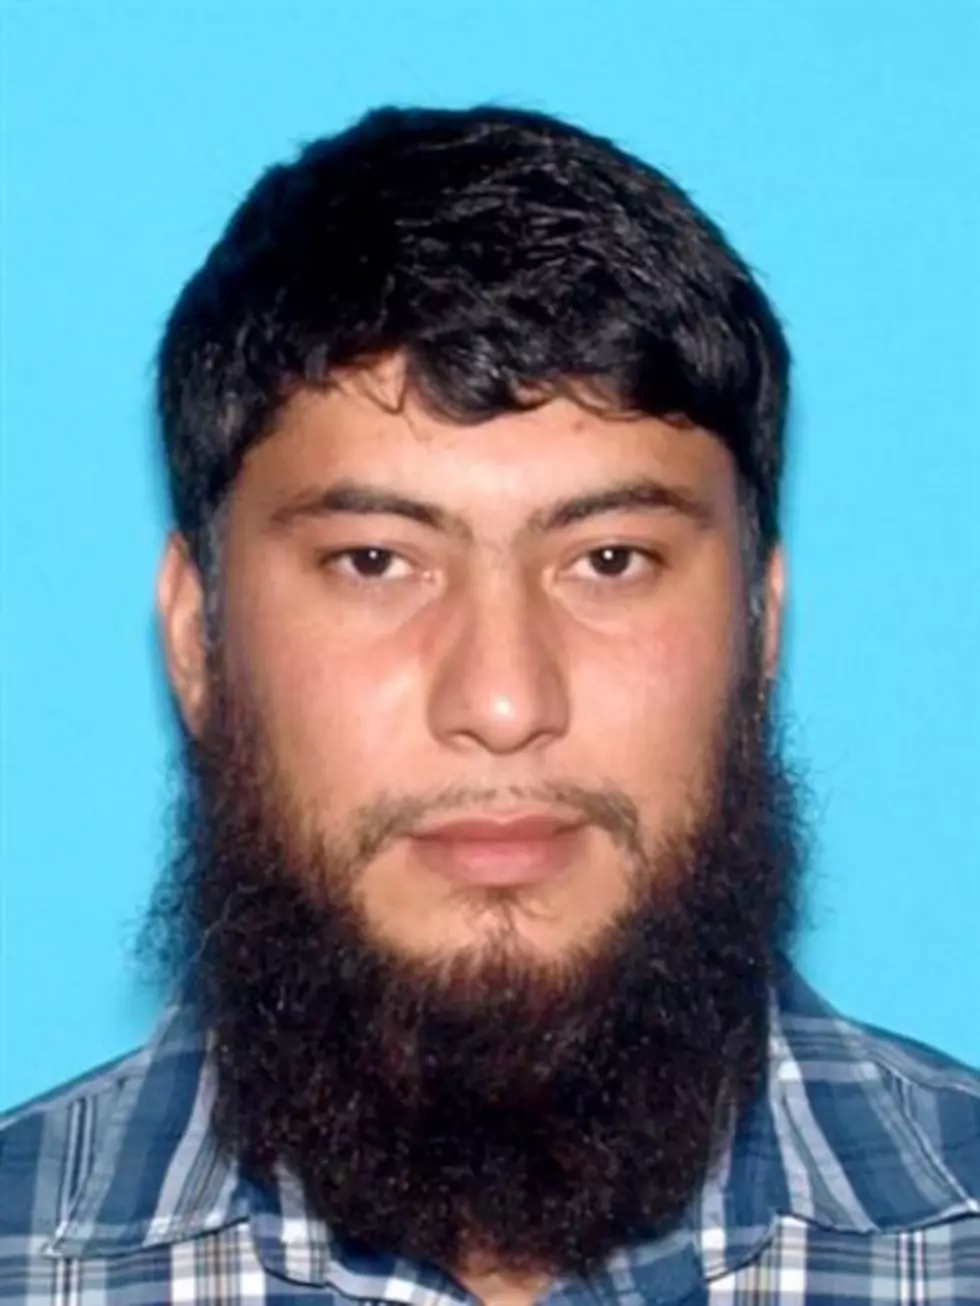 Man Facing Terrorism Charges in Idaho Gets New Lawyer